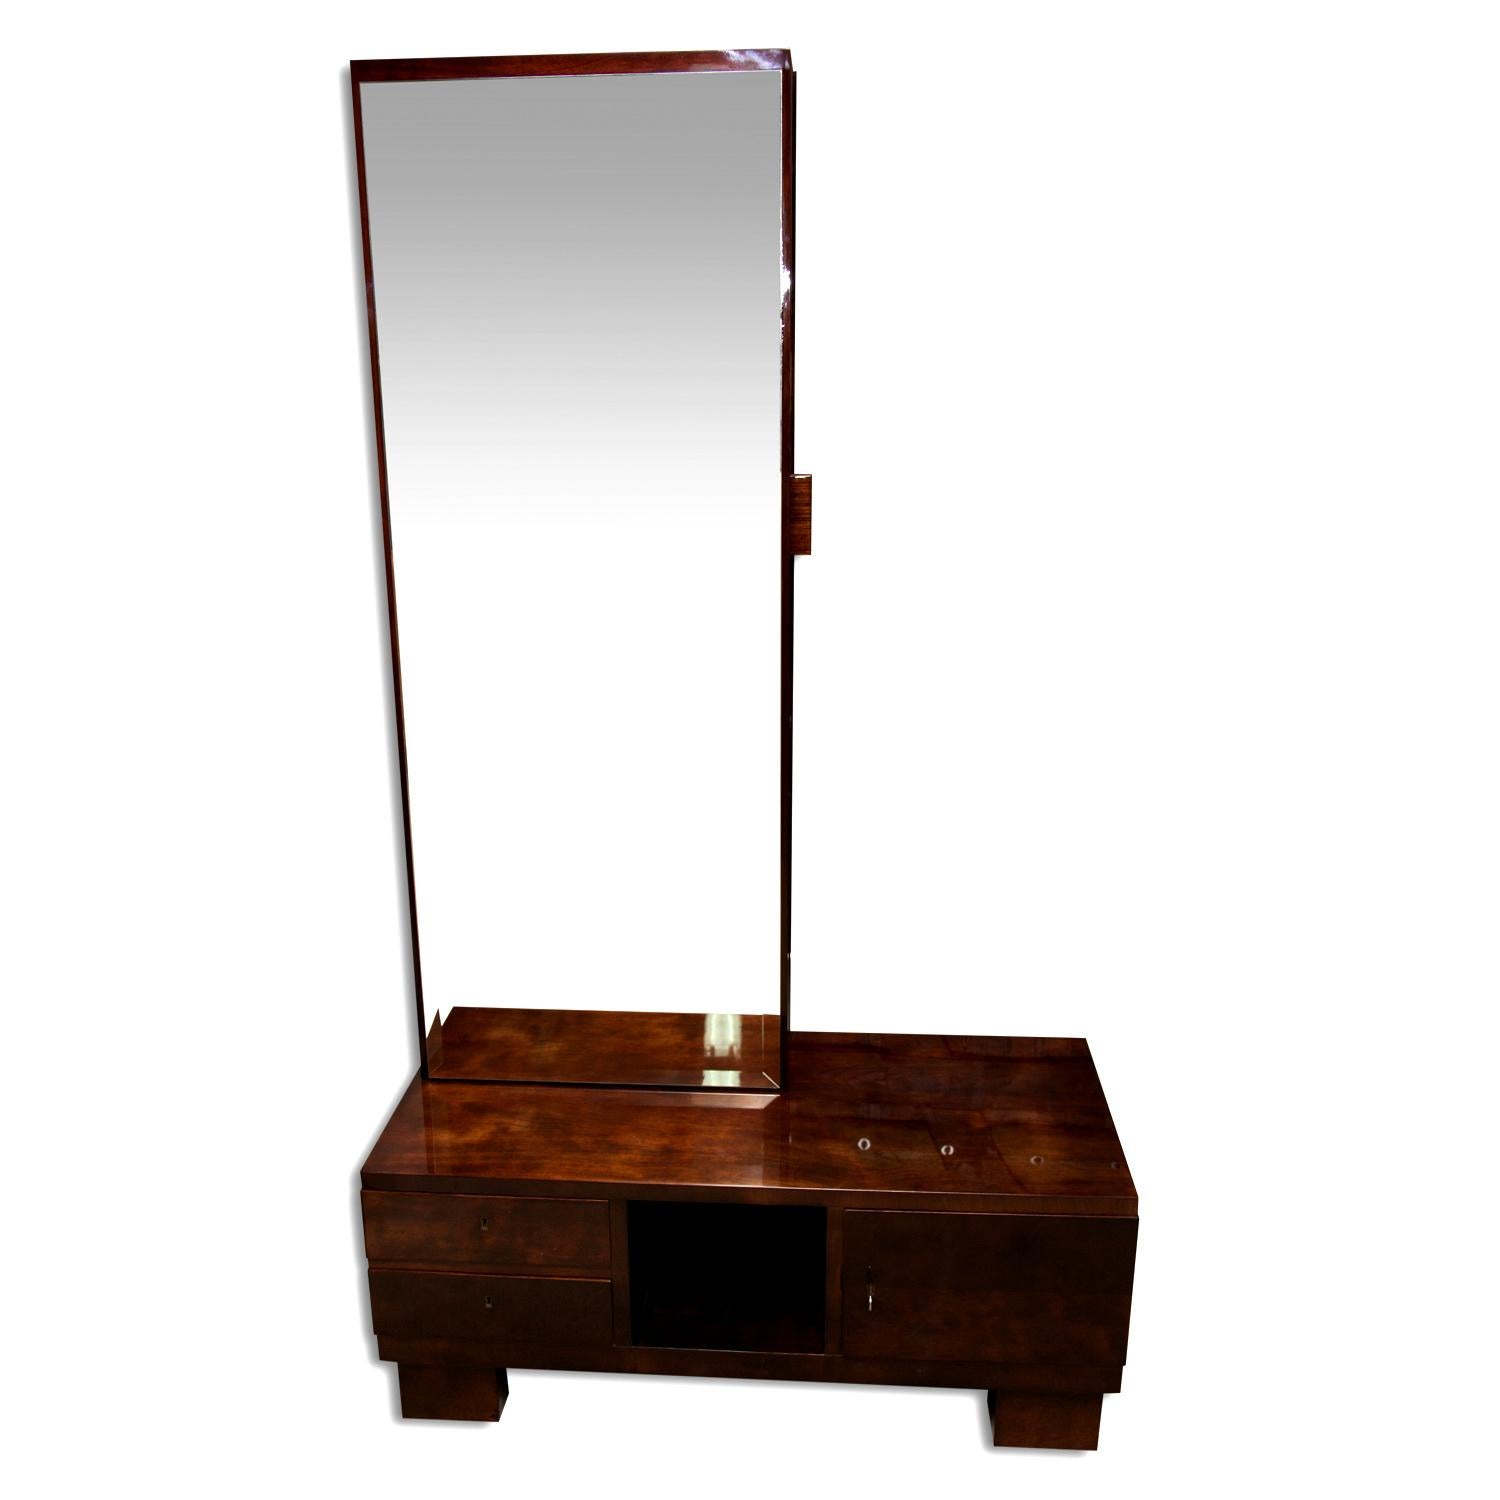 Luxurious functionalist vanity or dressing table-mirror with a drawer for toiletries on the side. It was made of solid wood with walnut veneer. The mirror is equipped with a storage space at the bottom. Very interesting design. It was made in the